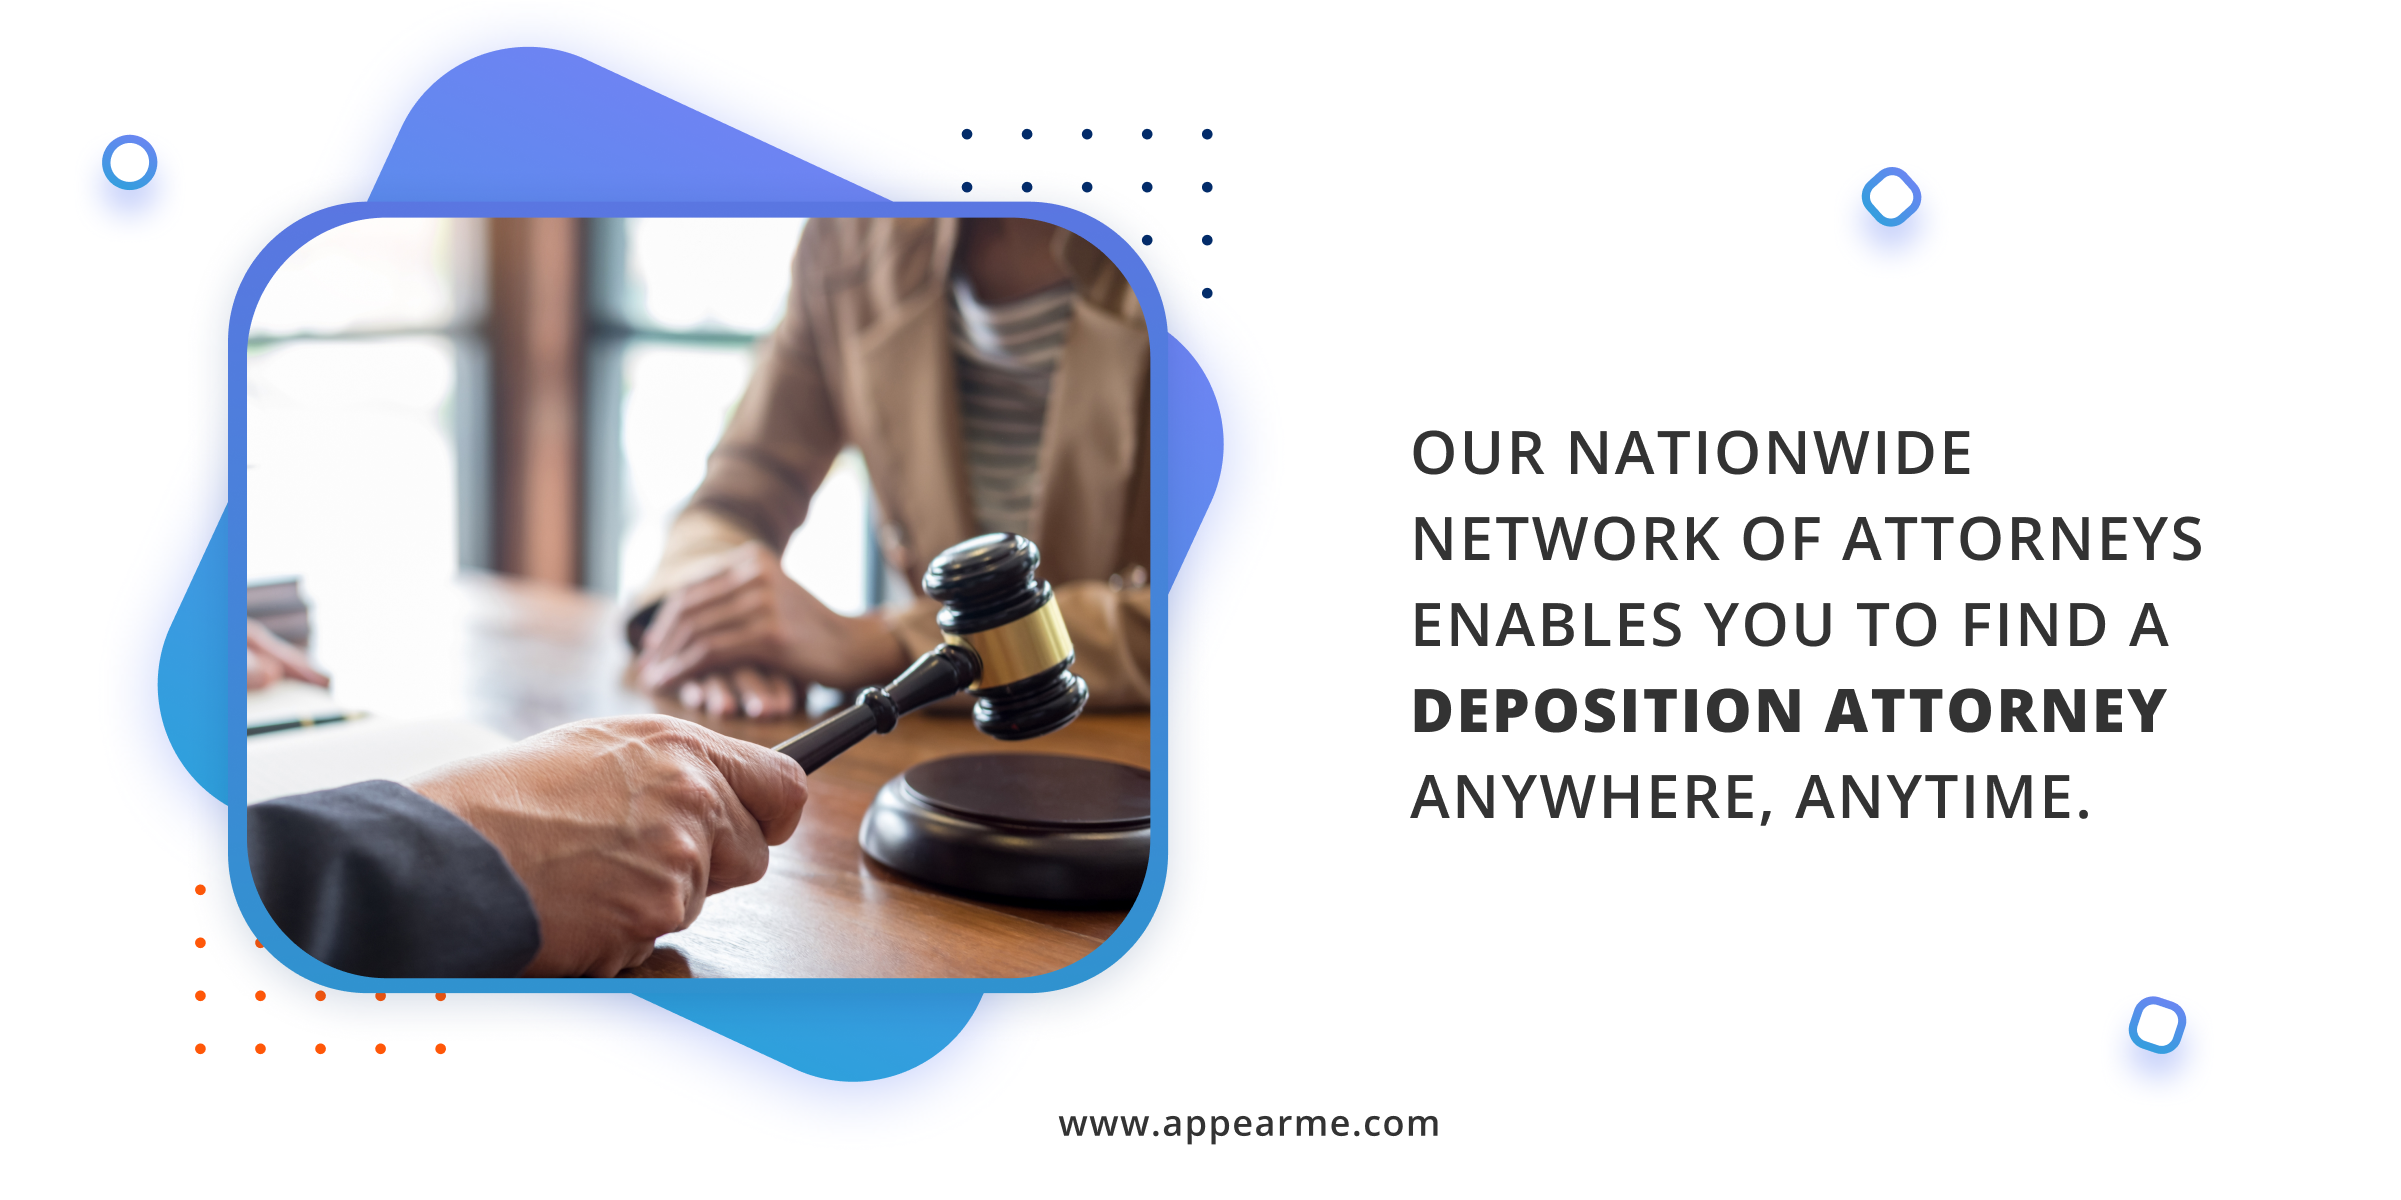 Our Nationwide Network of Attorneys Enables You to Find a Deposition Attorney Anywhere, Anytime